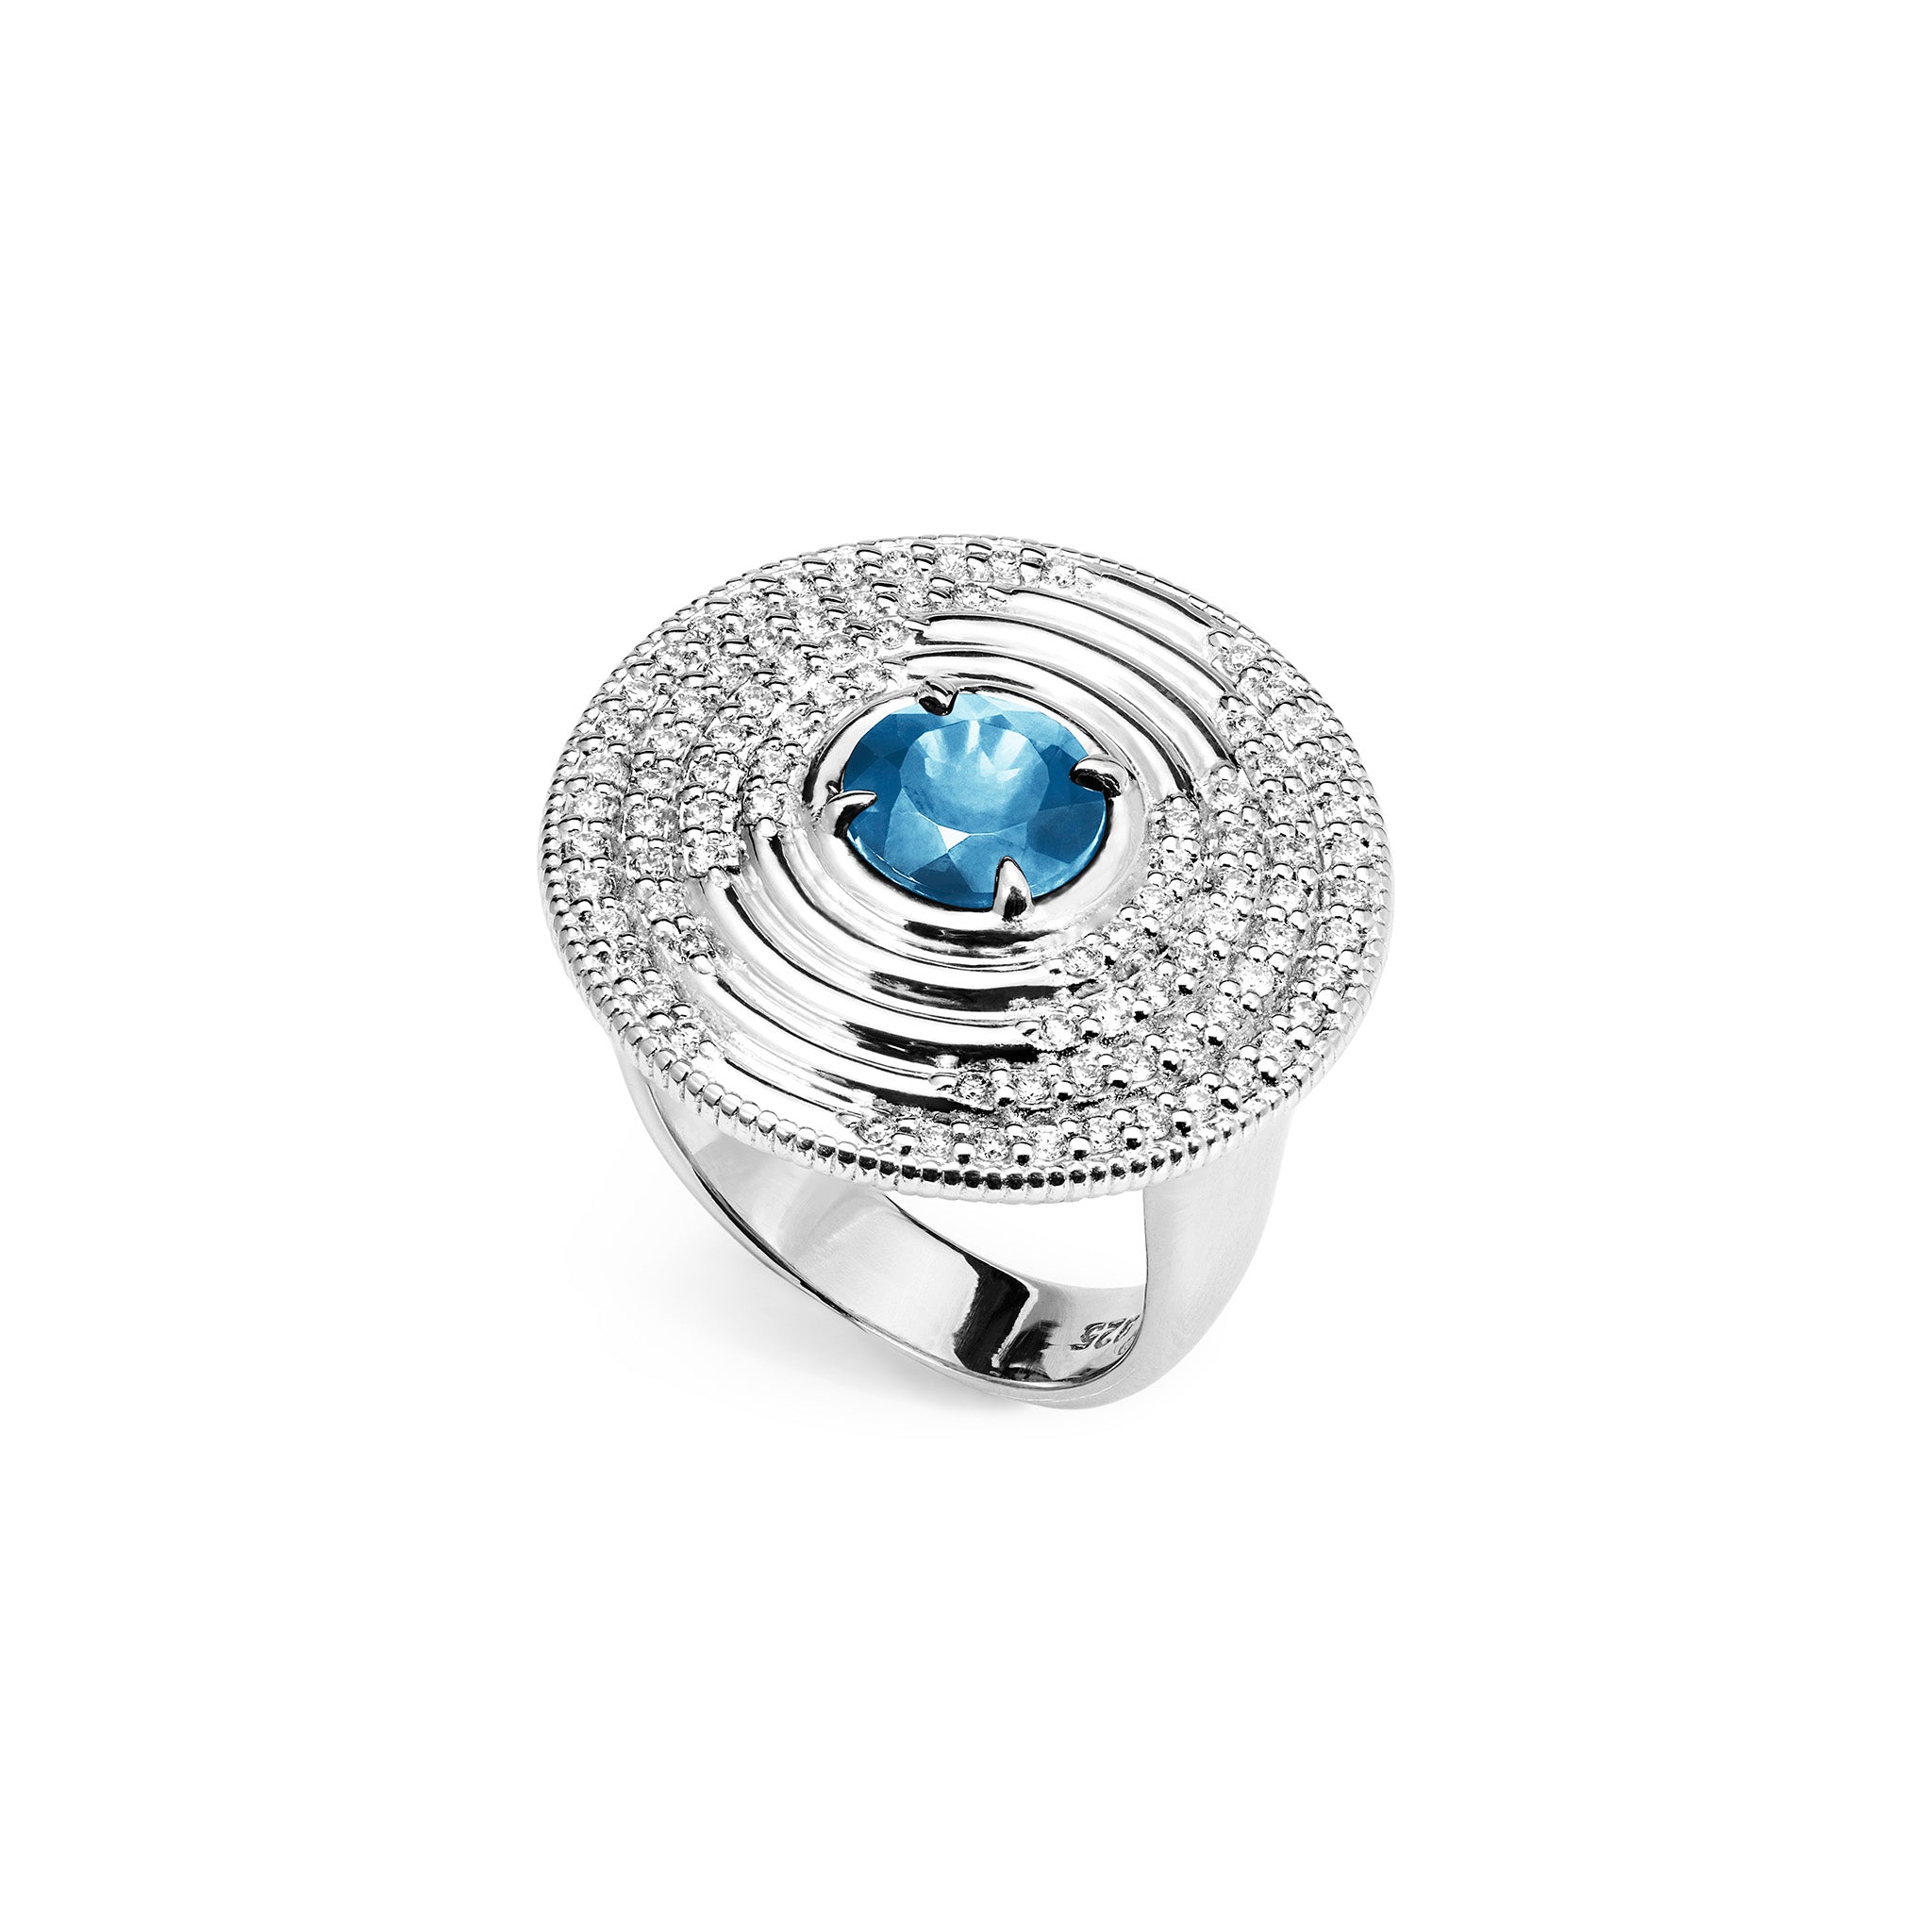 Max Round Ring with Swiss Blue Topaz and Diamonds